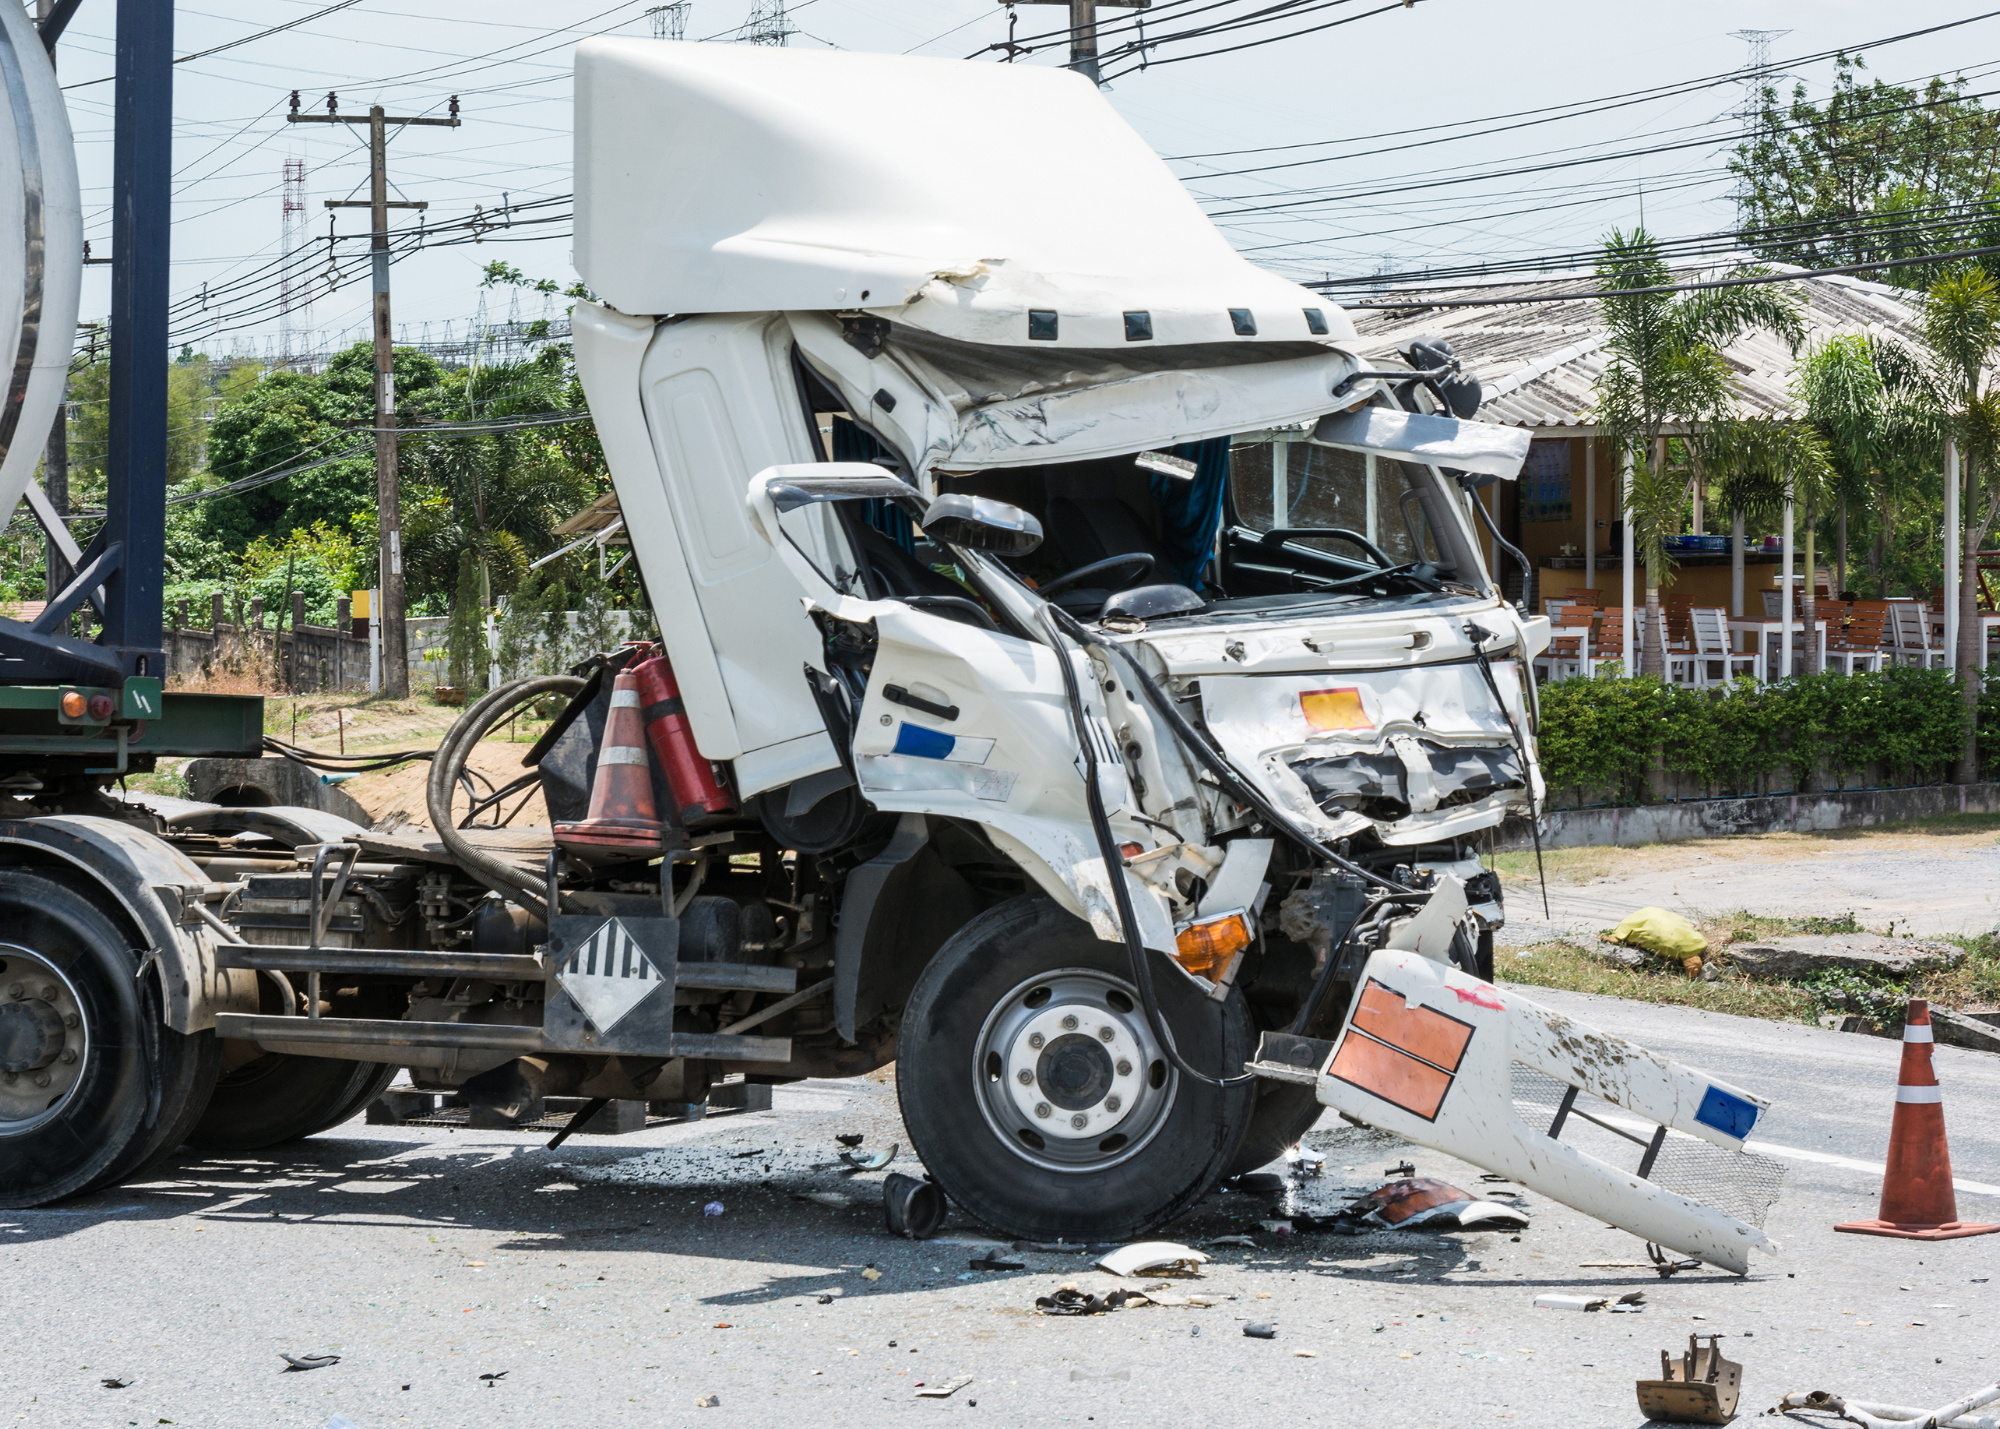 Greenboro Truck Accident Lawyer Offering Legal Assistance